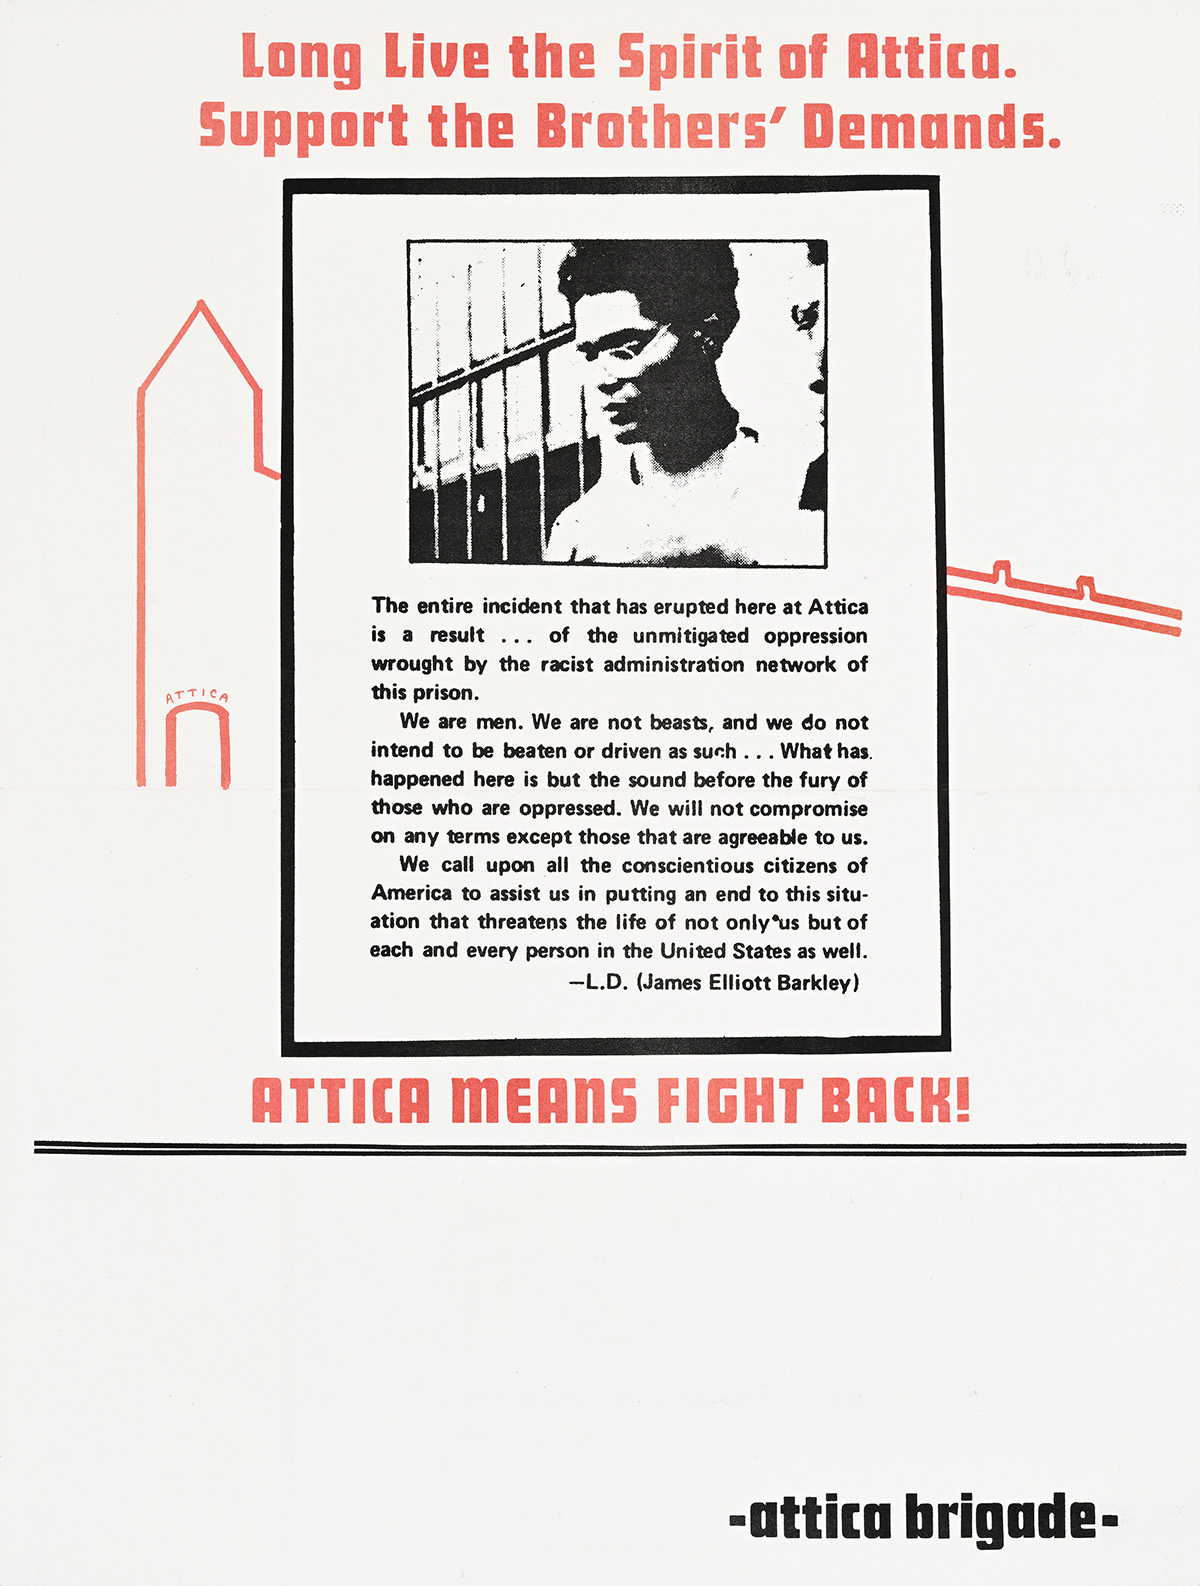 A poster of a Black man with glasses, next to Spirit of Attica text, in front of the Correctional Facility.